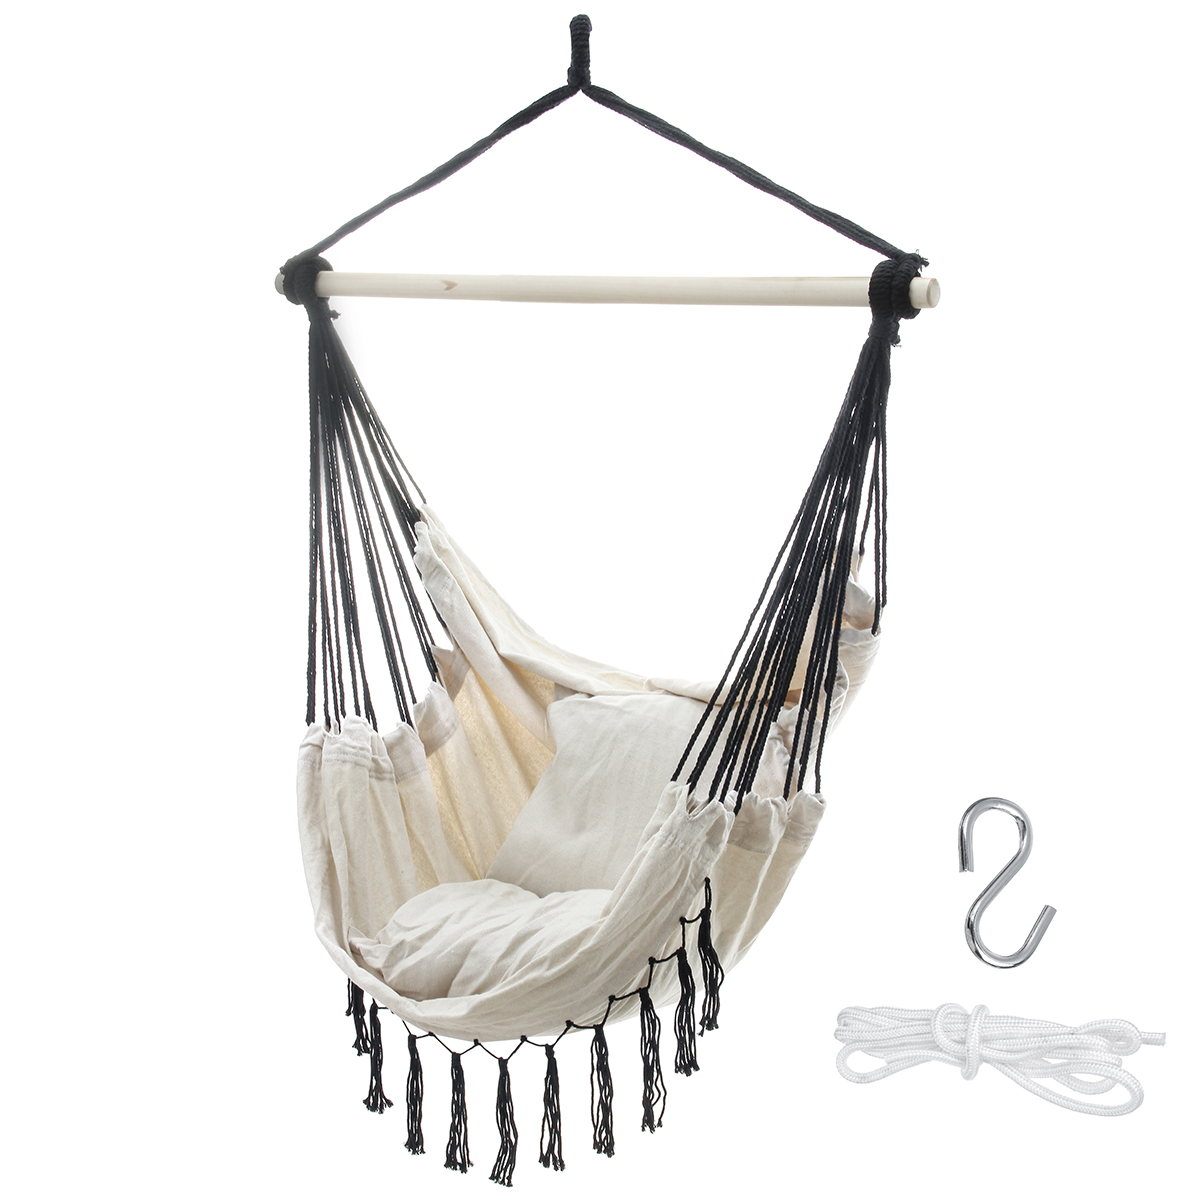 394x512inch-Hammock-Chair-Double-People-Hanging-Swinging-Garden-Swinging-Chair-Camping-Travel-Beach-1742289-6